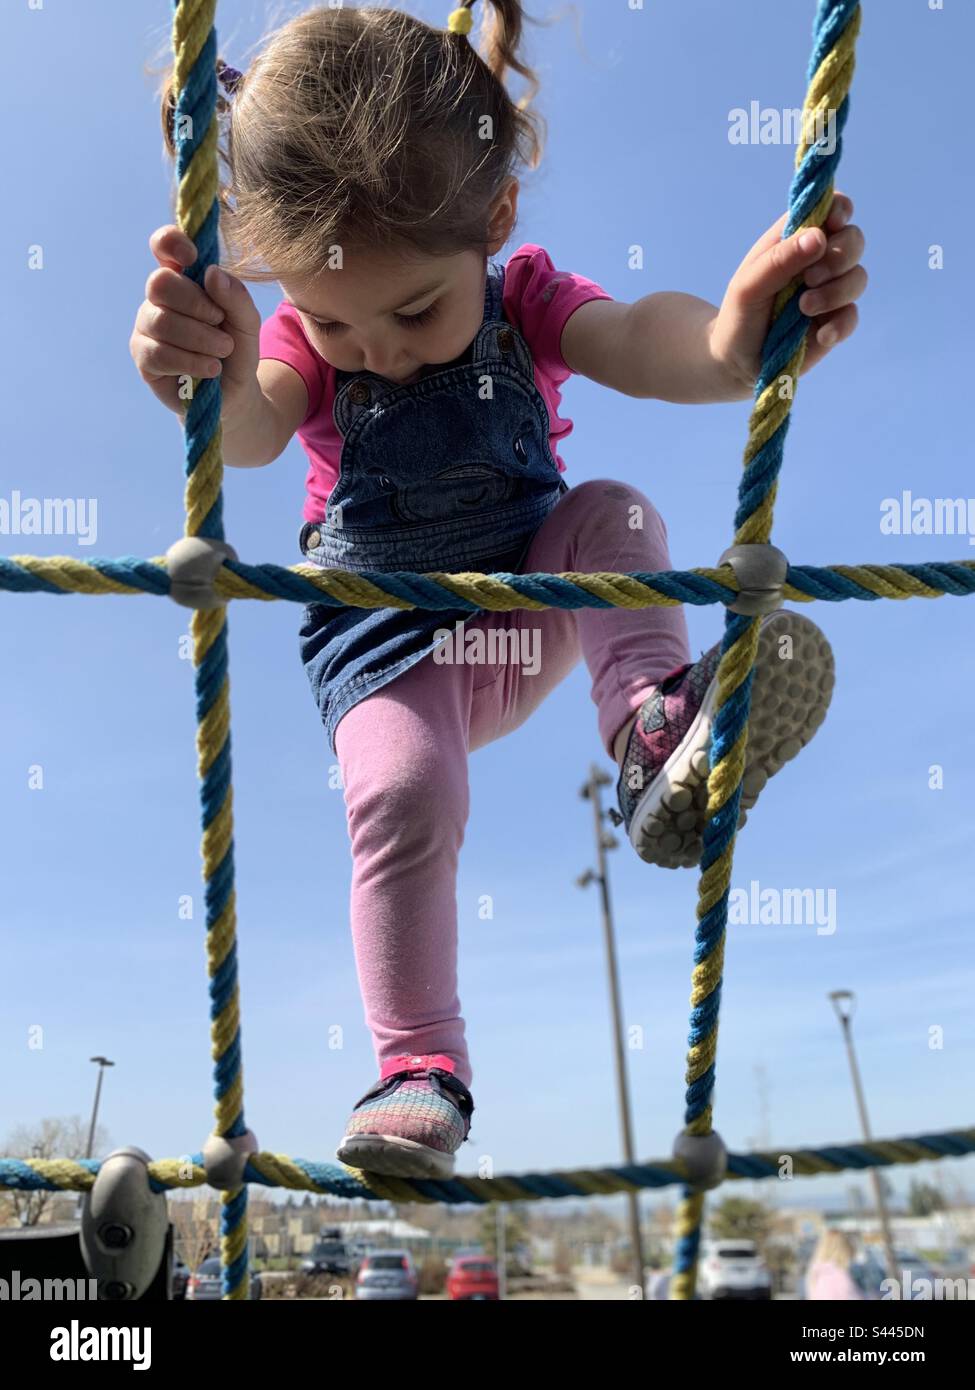 Young toddler girl climbing rope net on play structure. Stock Photo